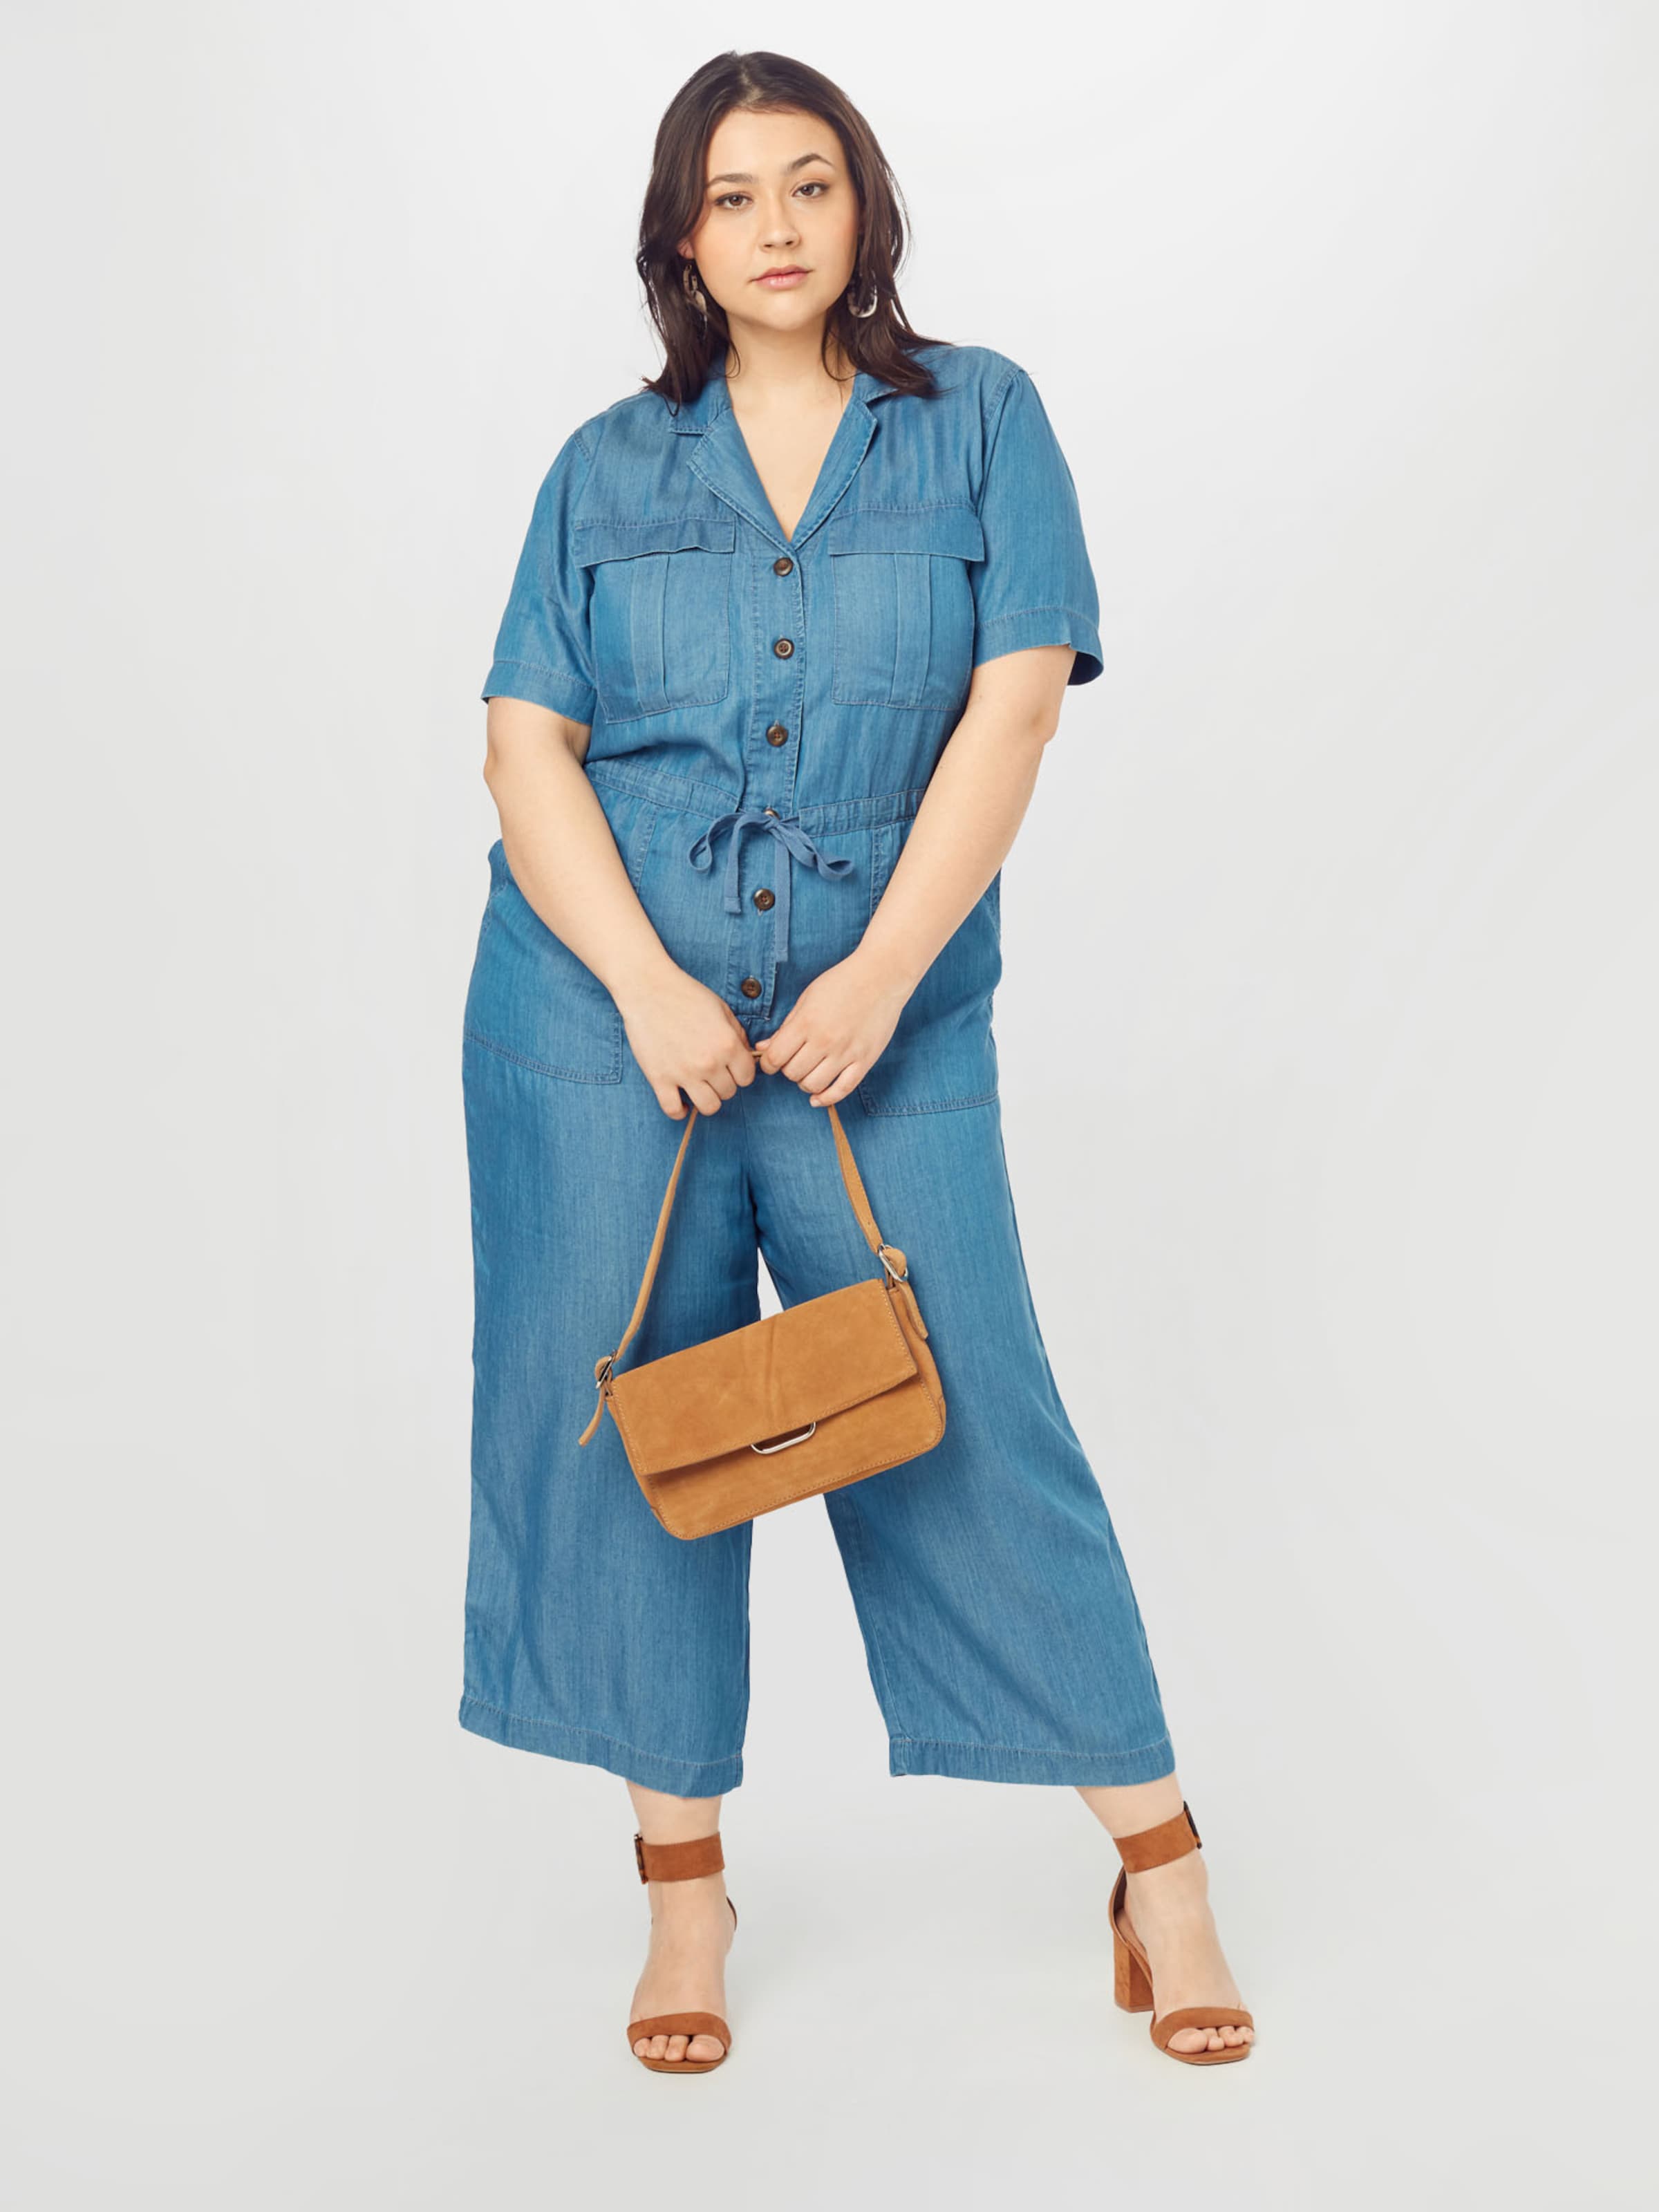 Rock Your Curves by Angelina K. Jumpsuit in Blau 